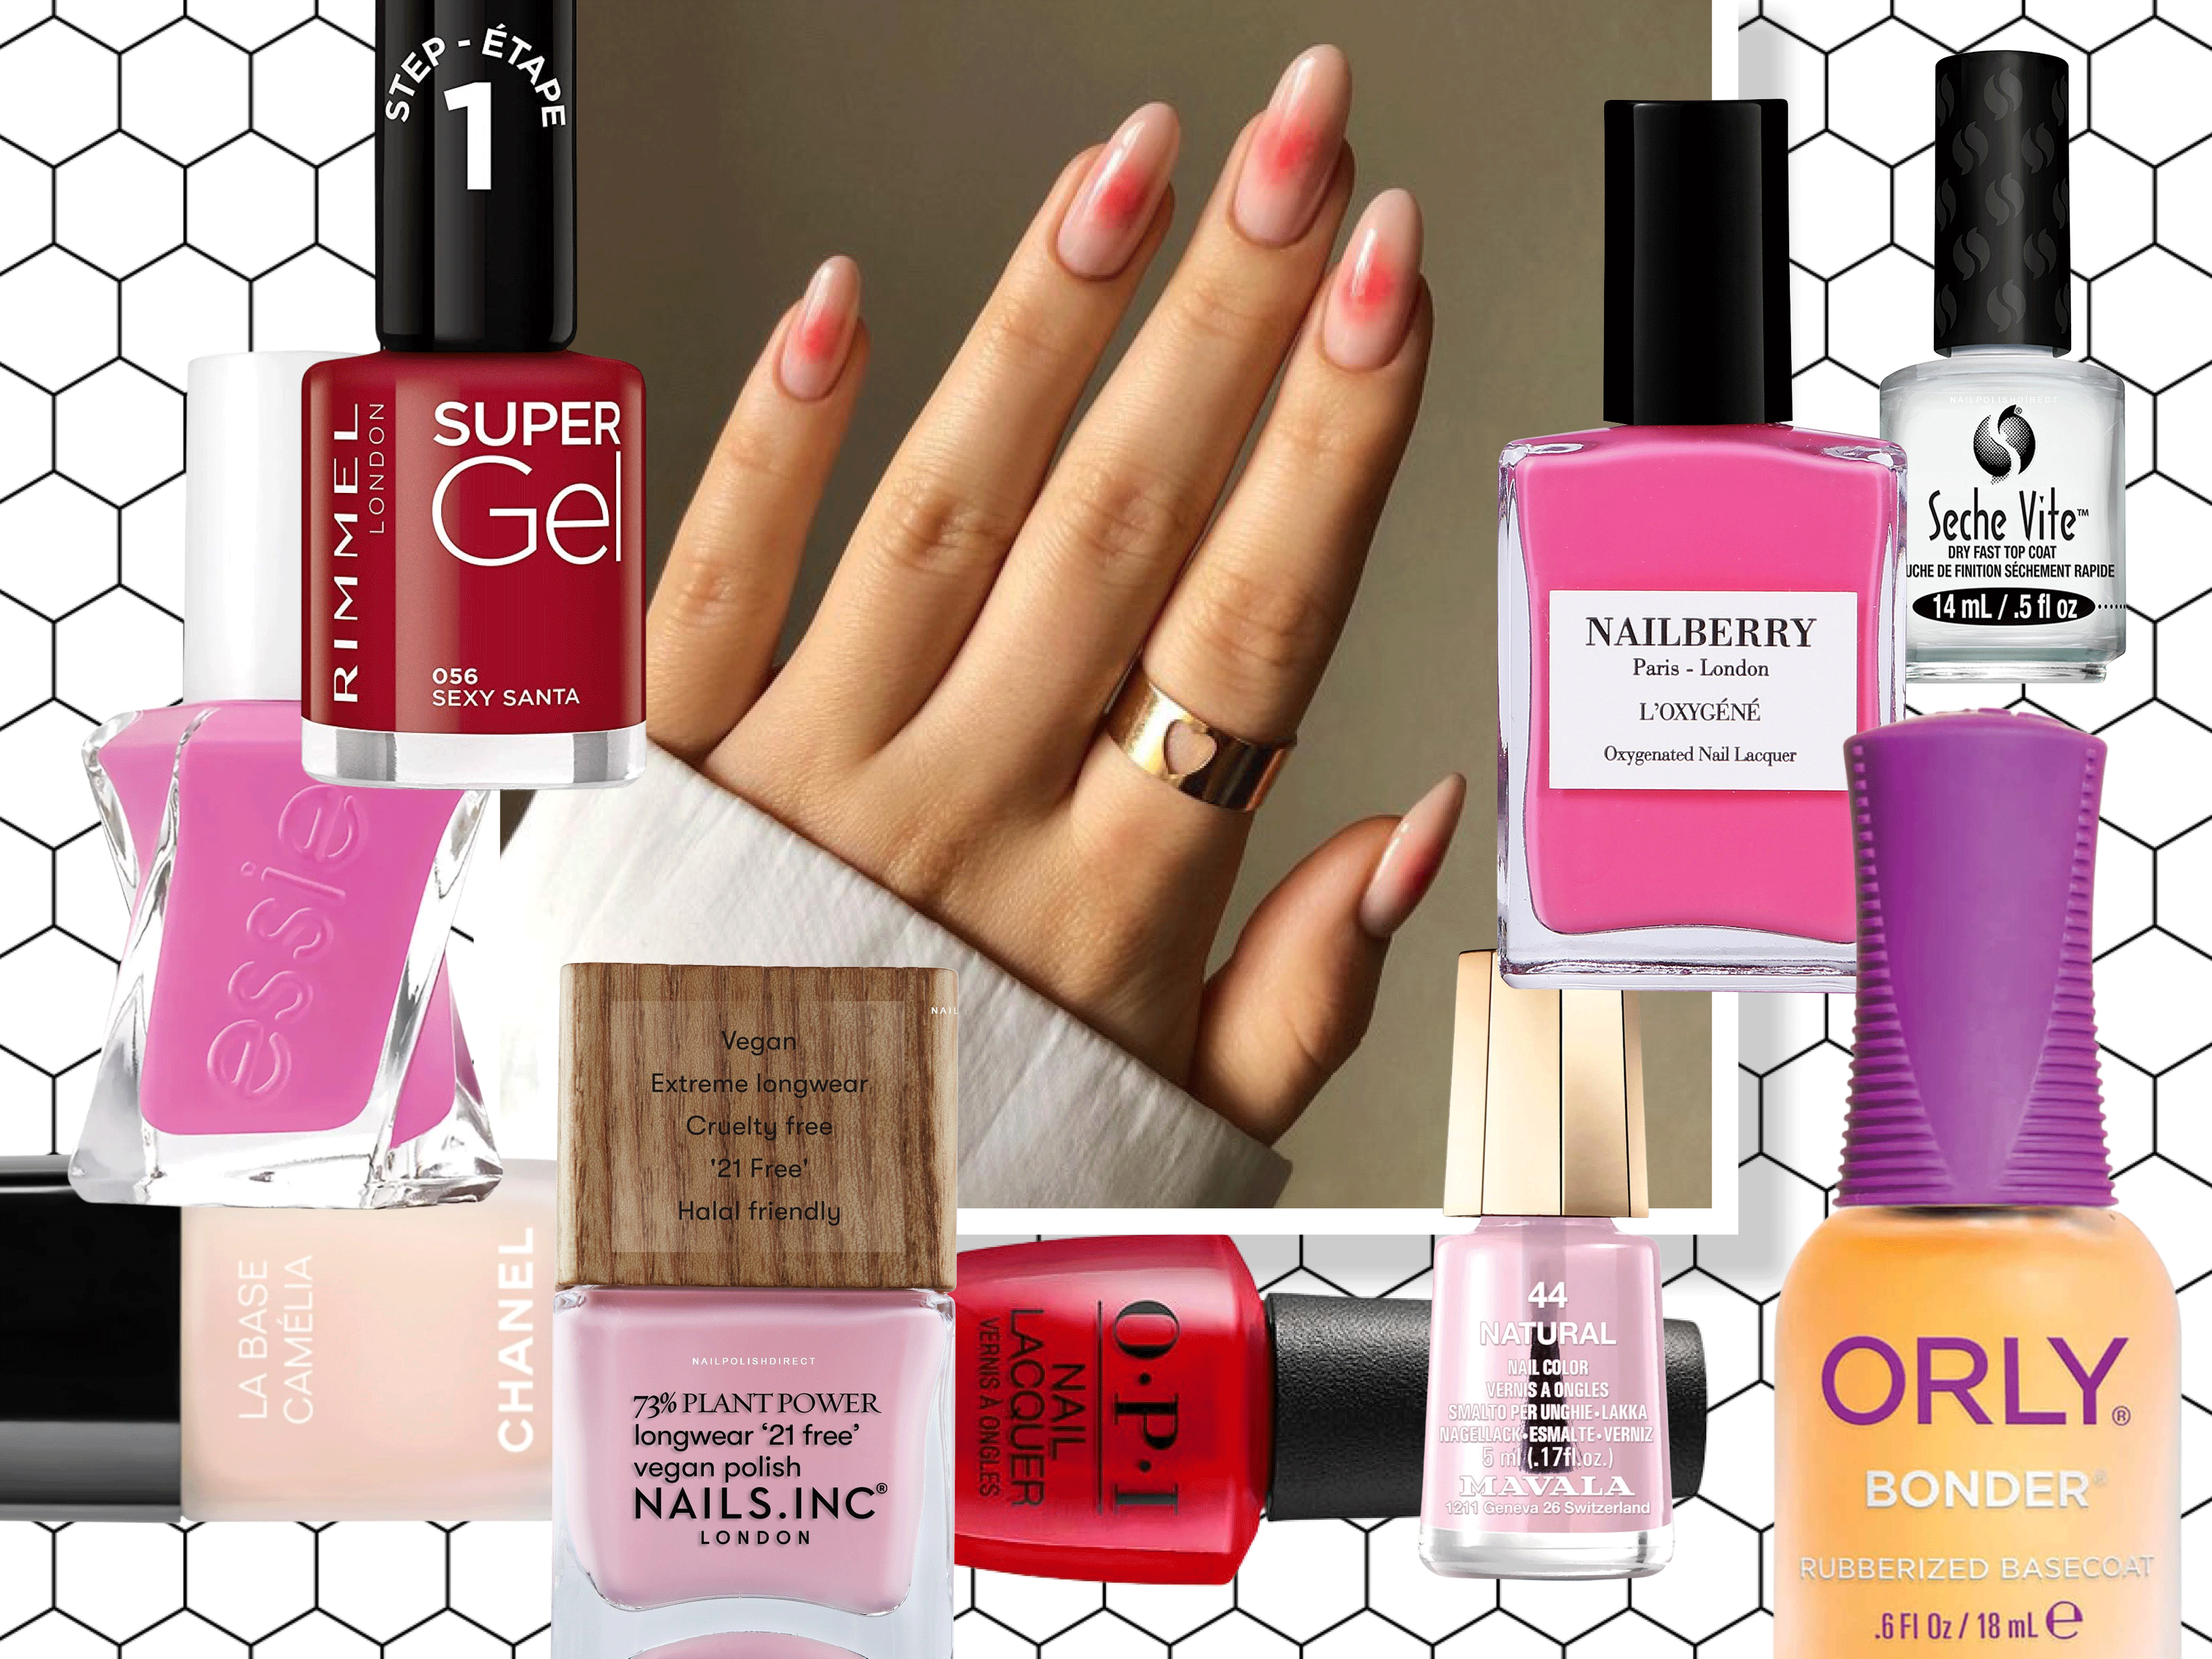 Blush nails: how to achieve the Korean nail trend from home